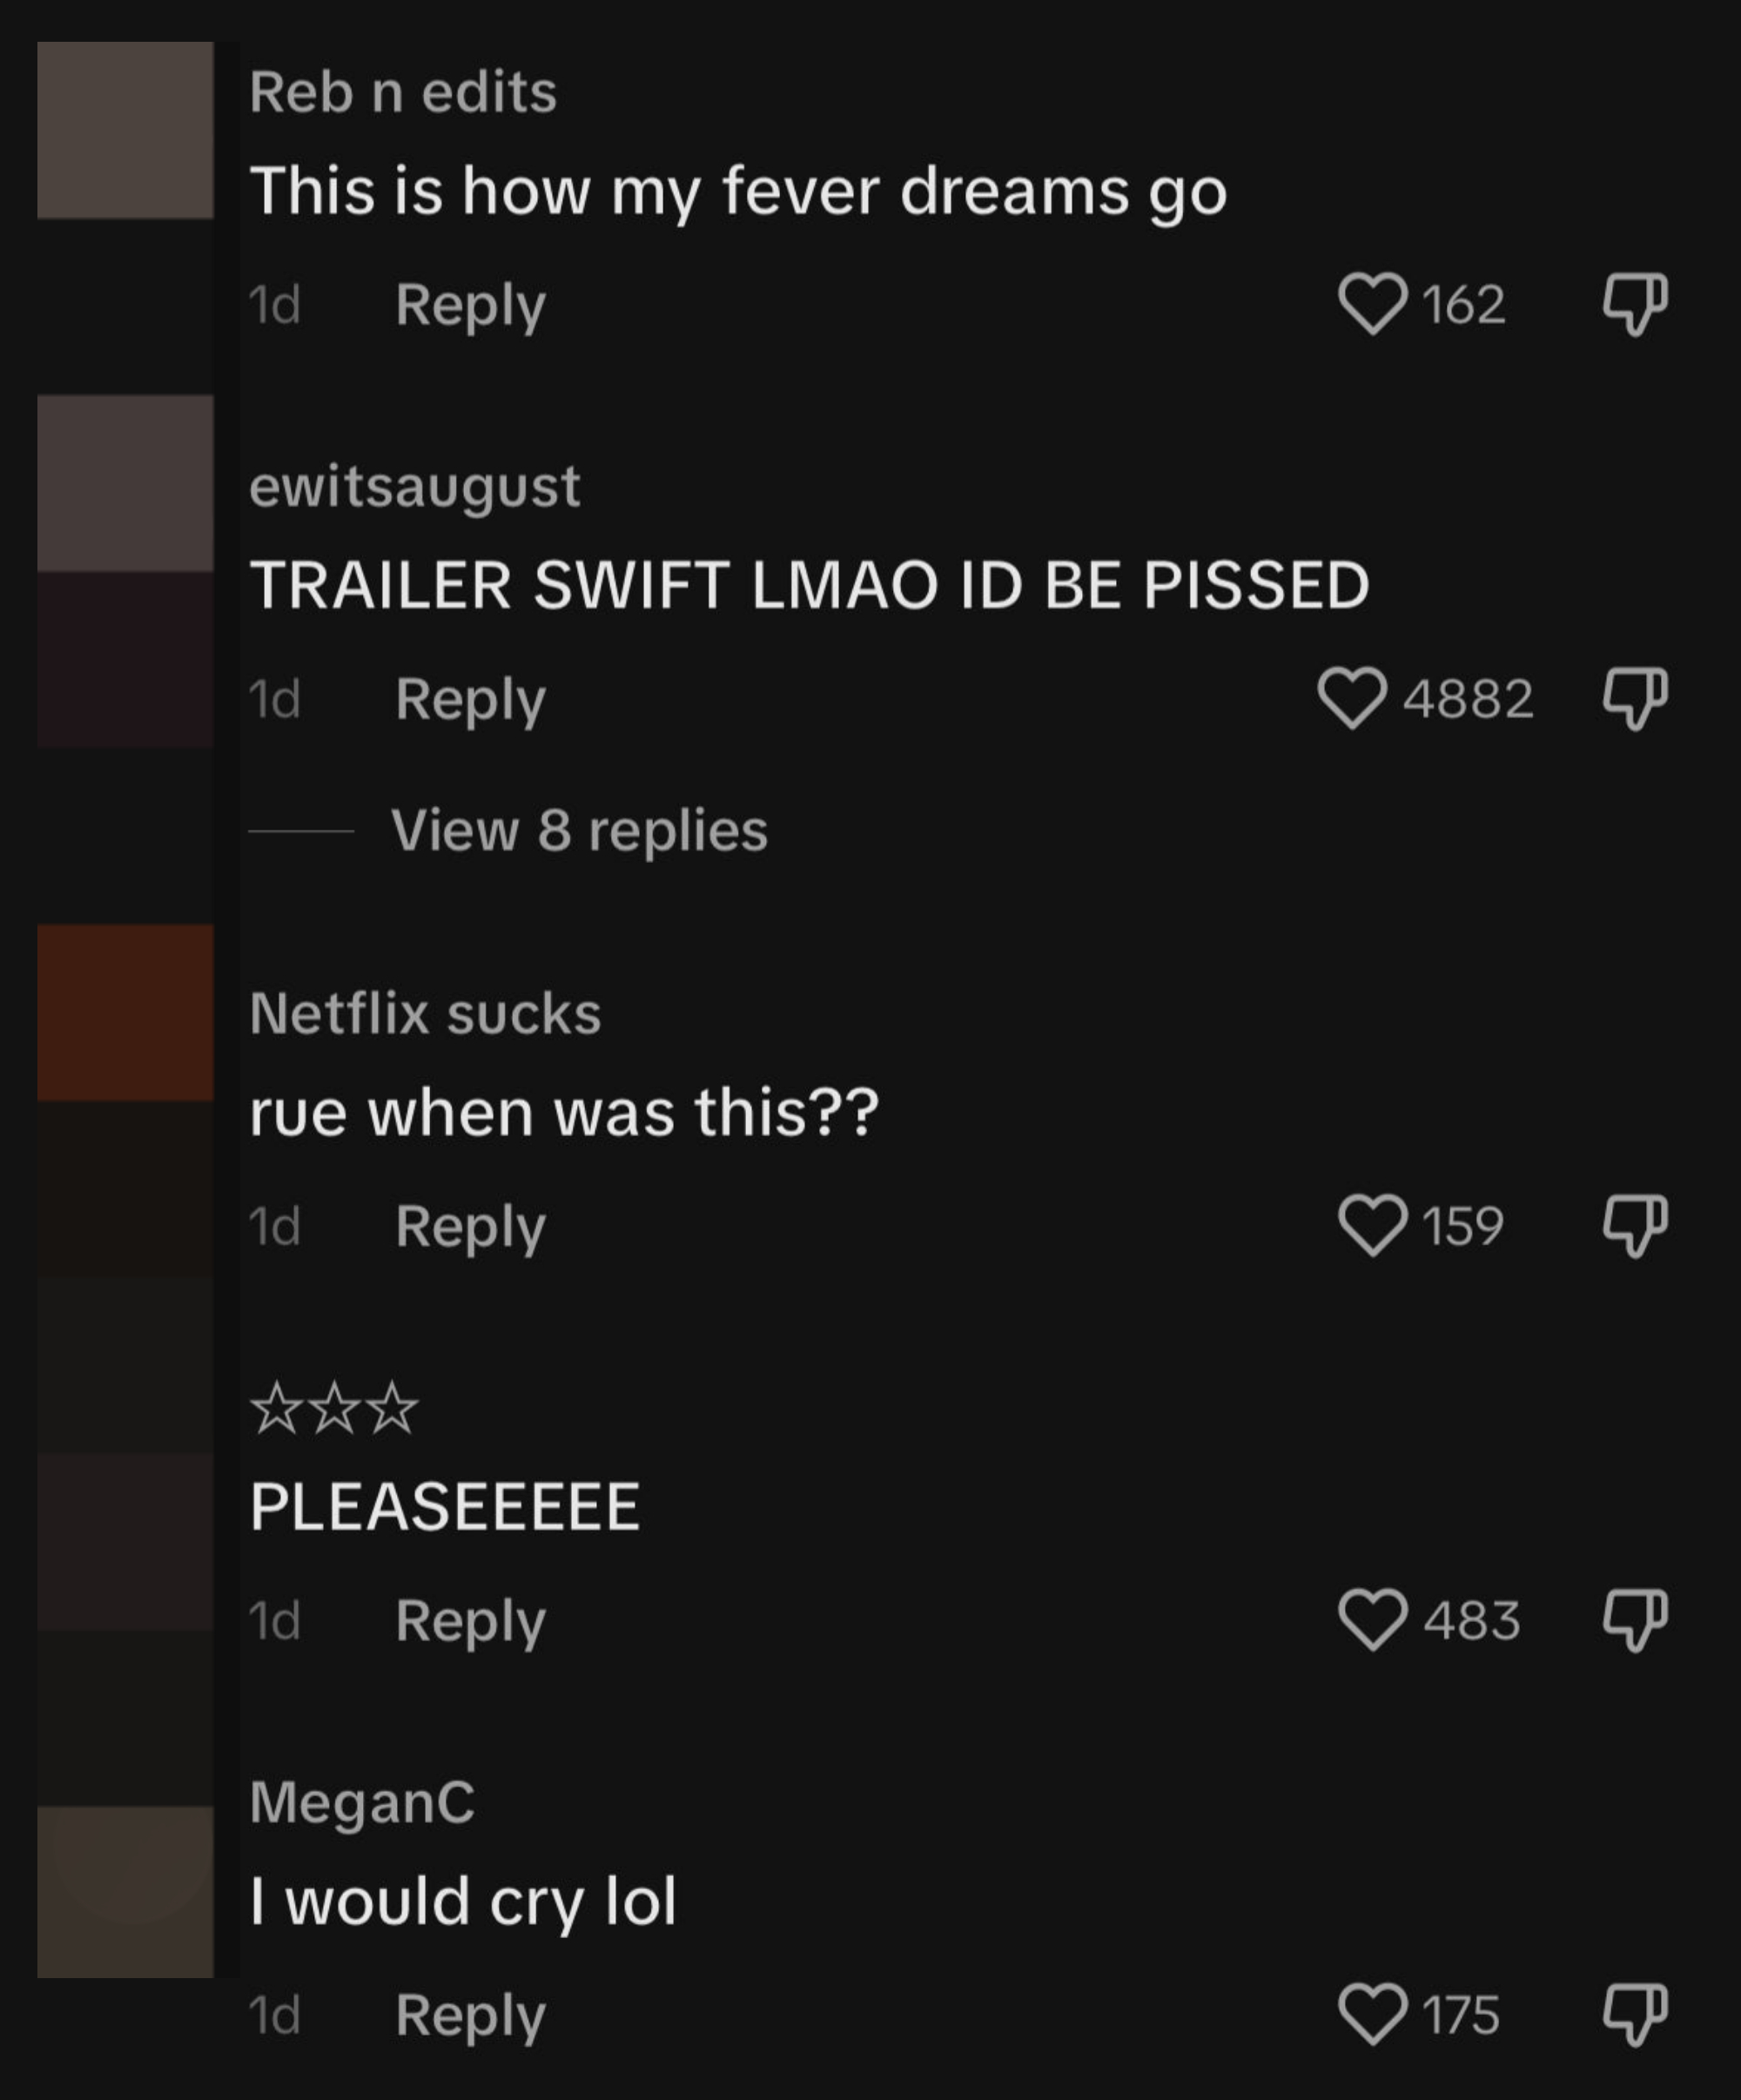 someone comments, trailer swift